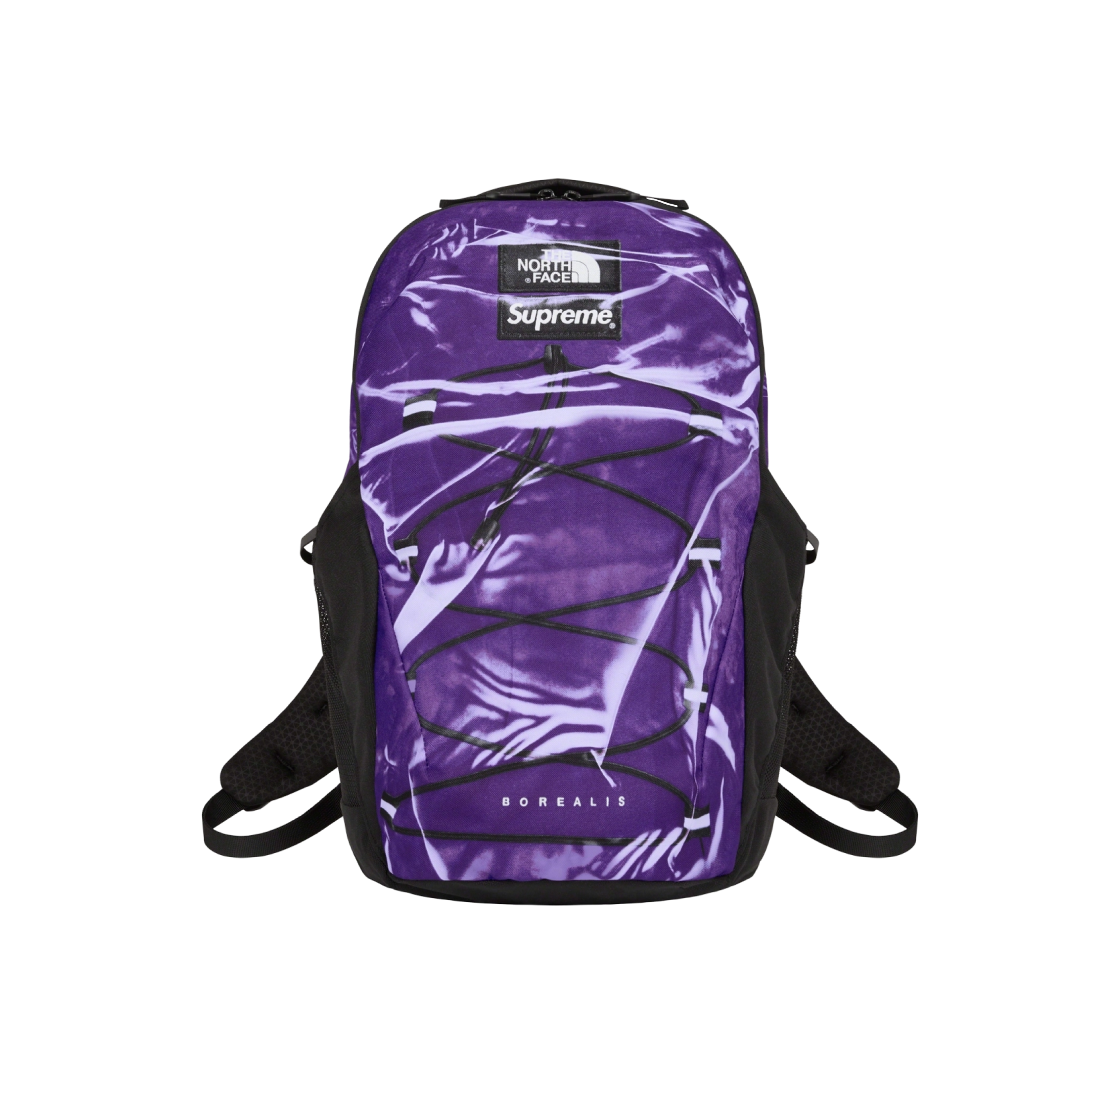 Supreme x The North Face Trompe L oeil Printed Borealis Backpack